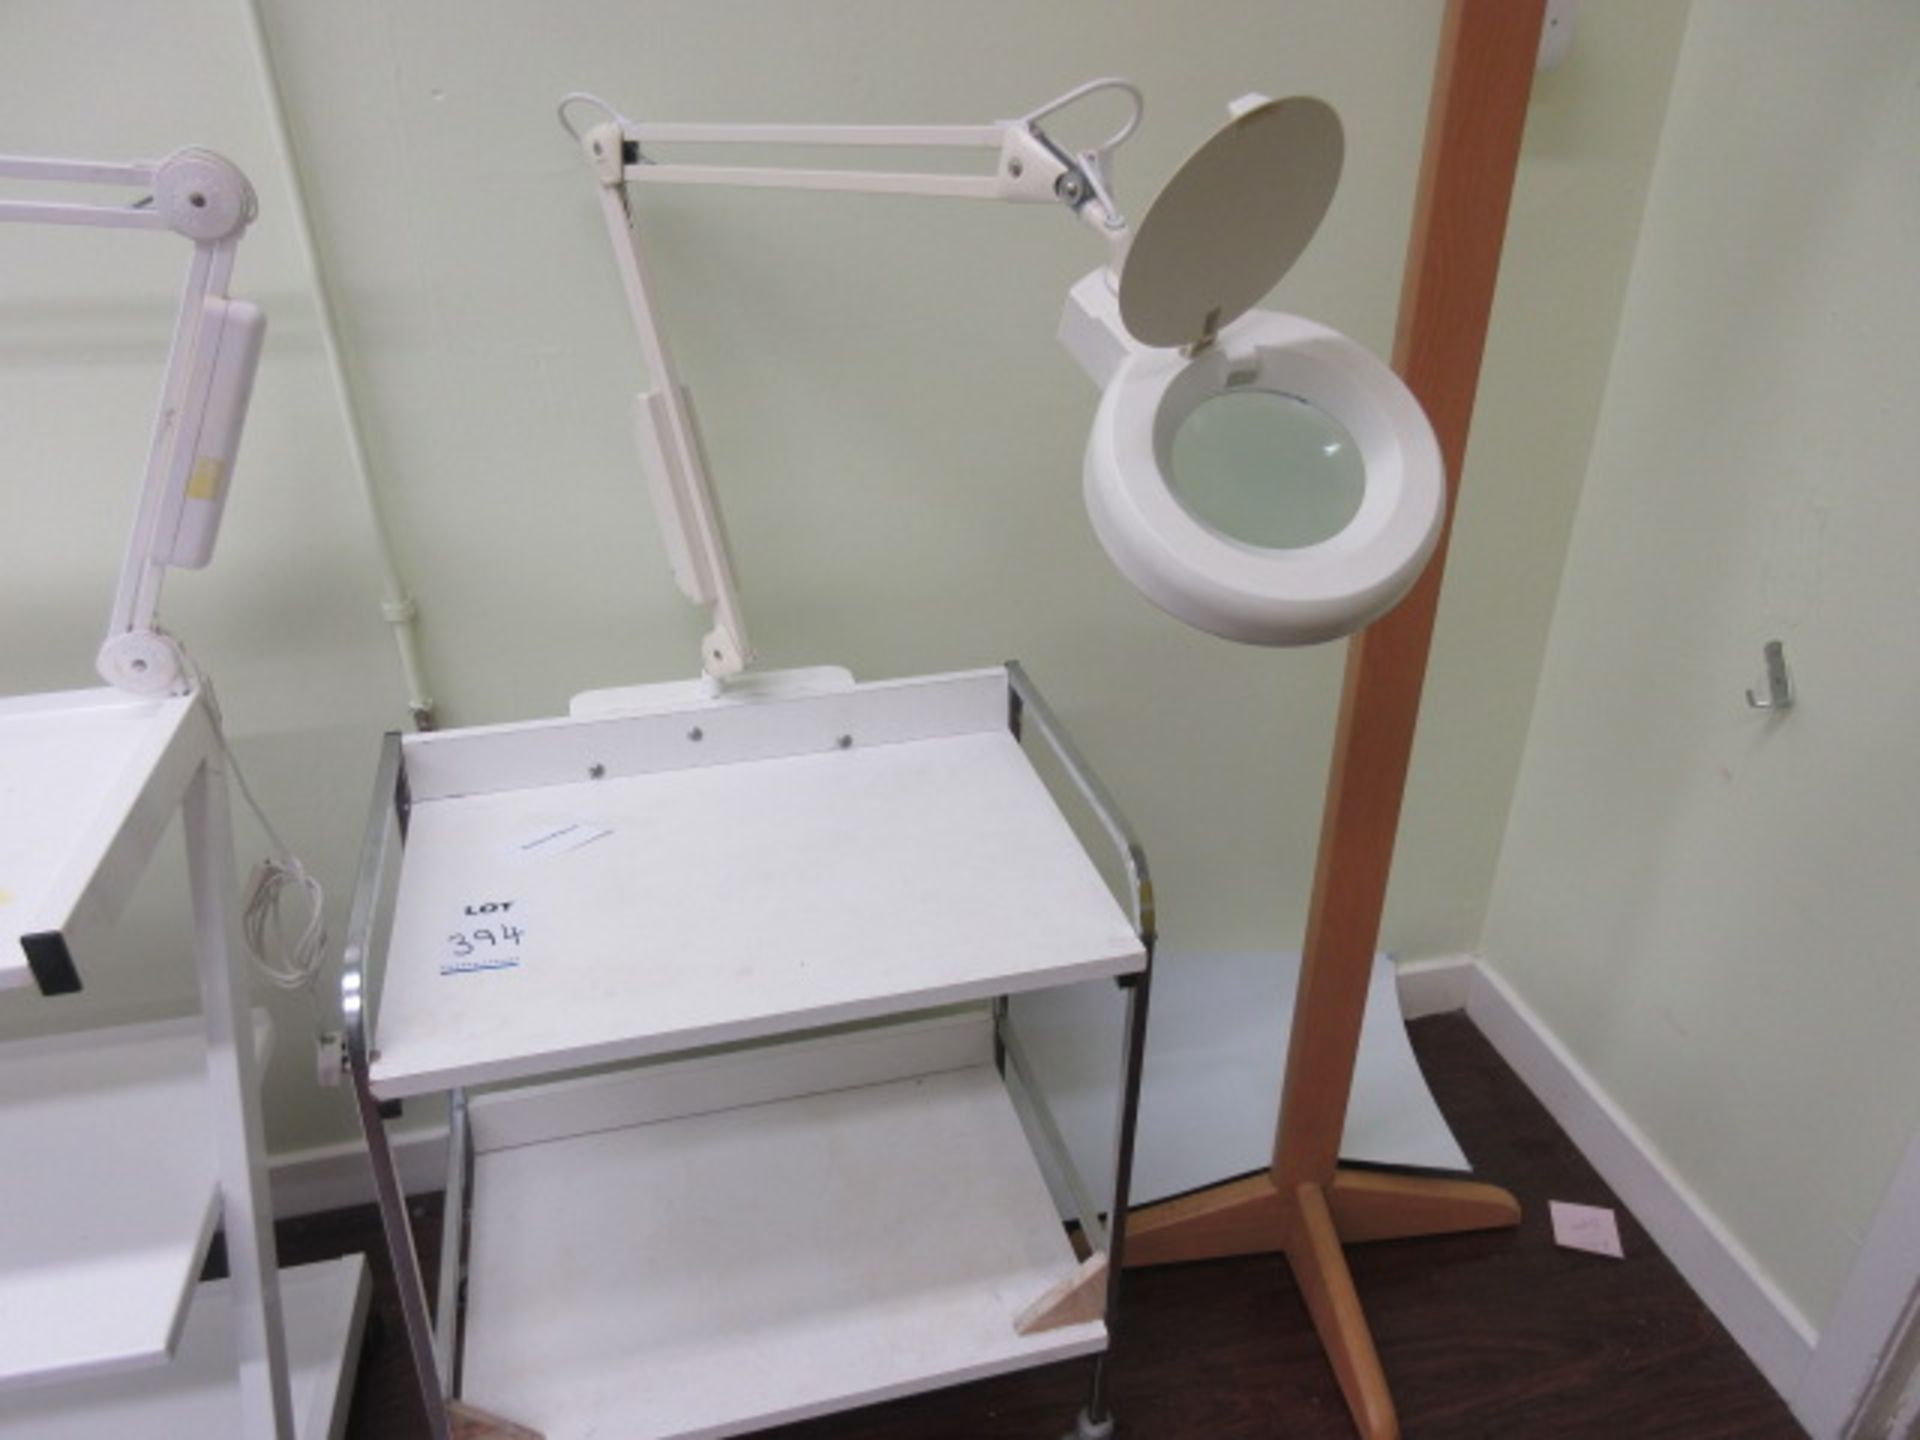 Beauty Therapy Trolley with Illuminating Magnifying Lamp Holehouse Road. Beauty Salon Y11 2 Snd